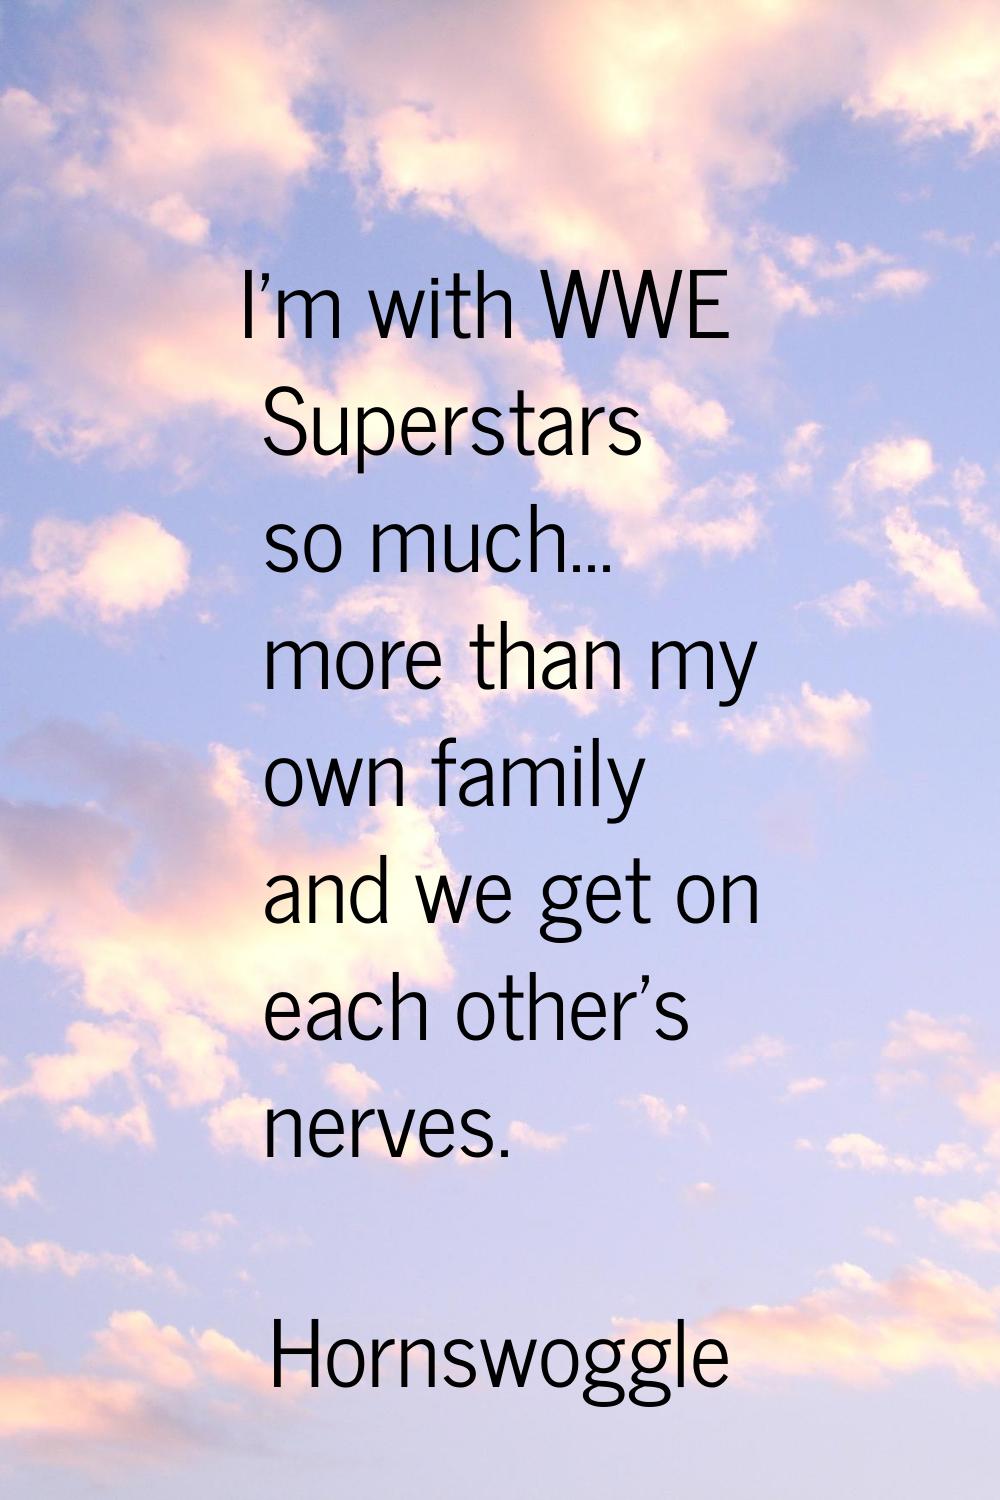 I'm with WWE Superstars so much... more than my own family and we get on each other's nerves.